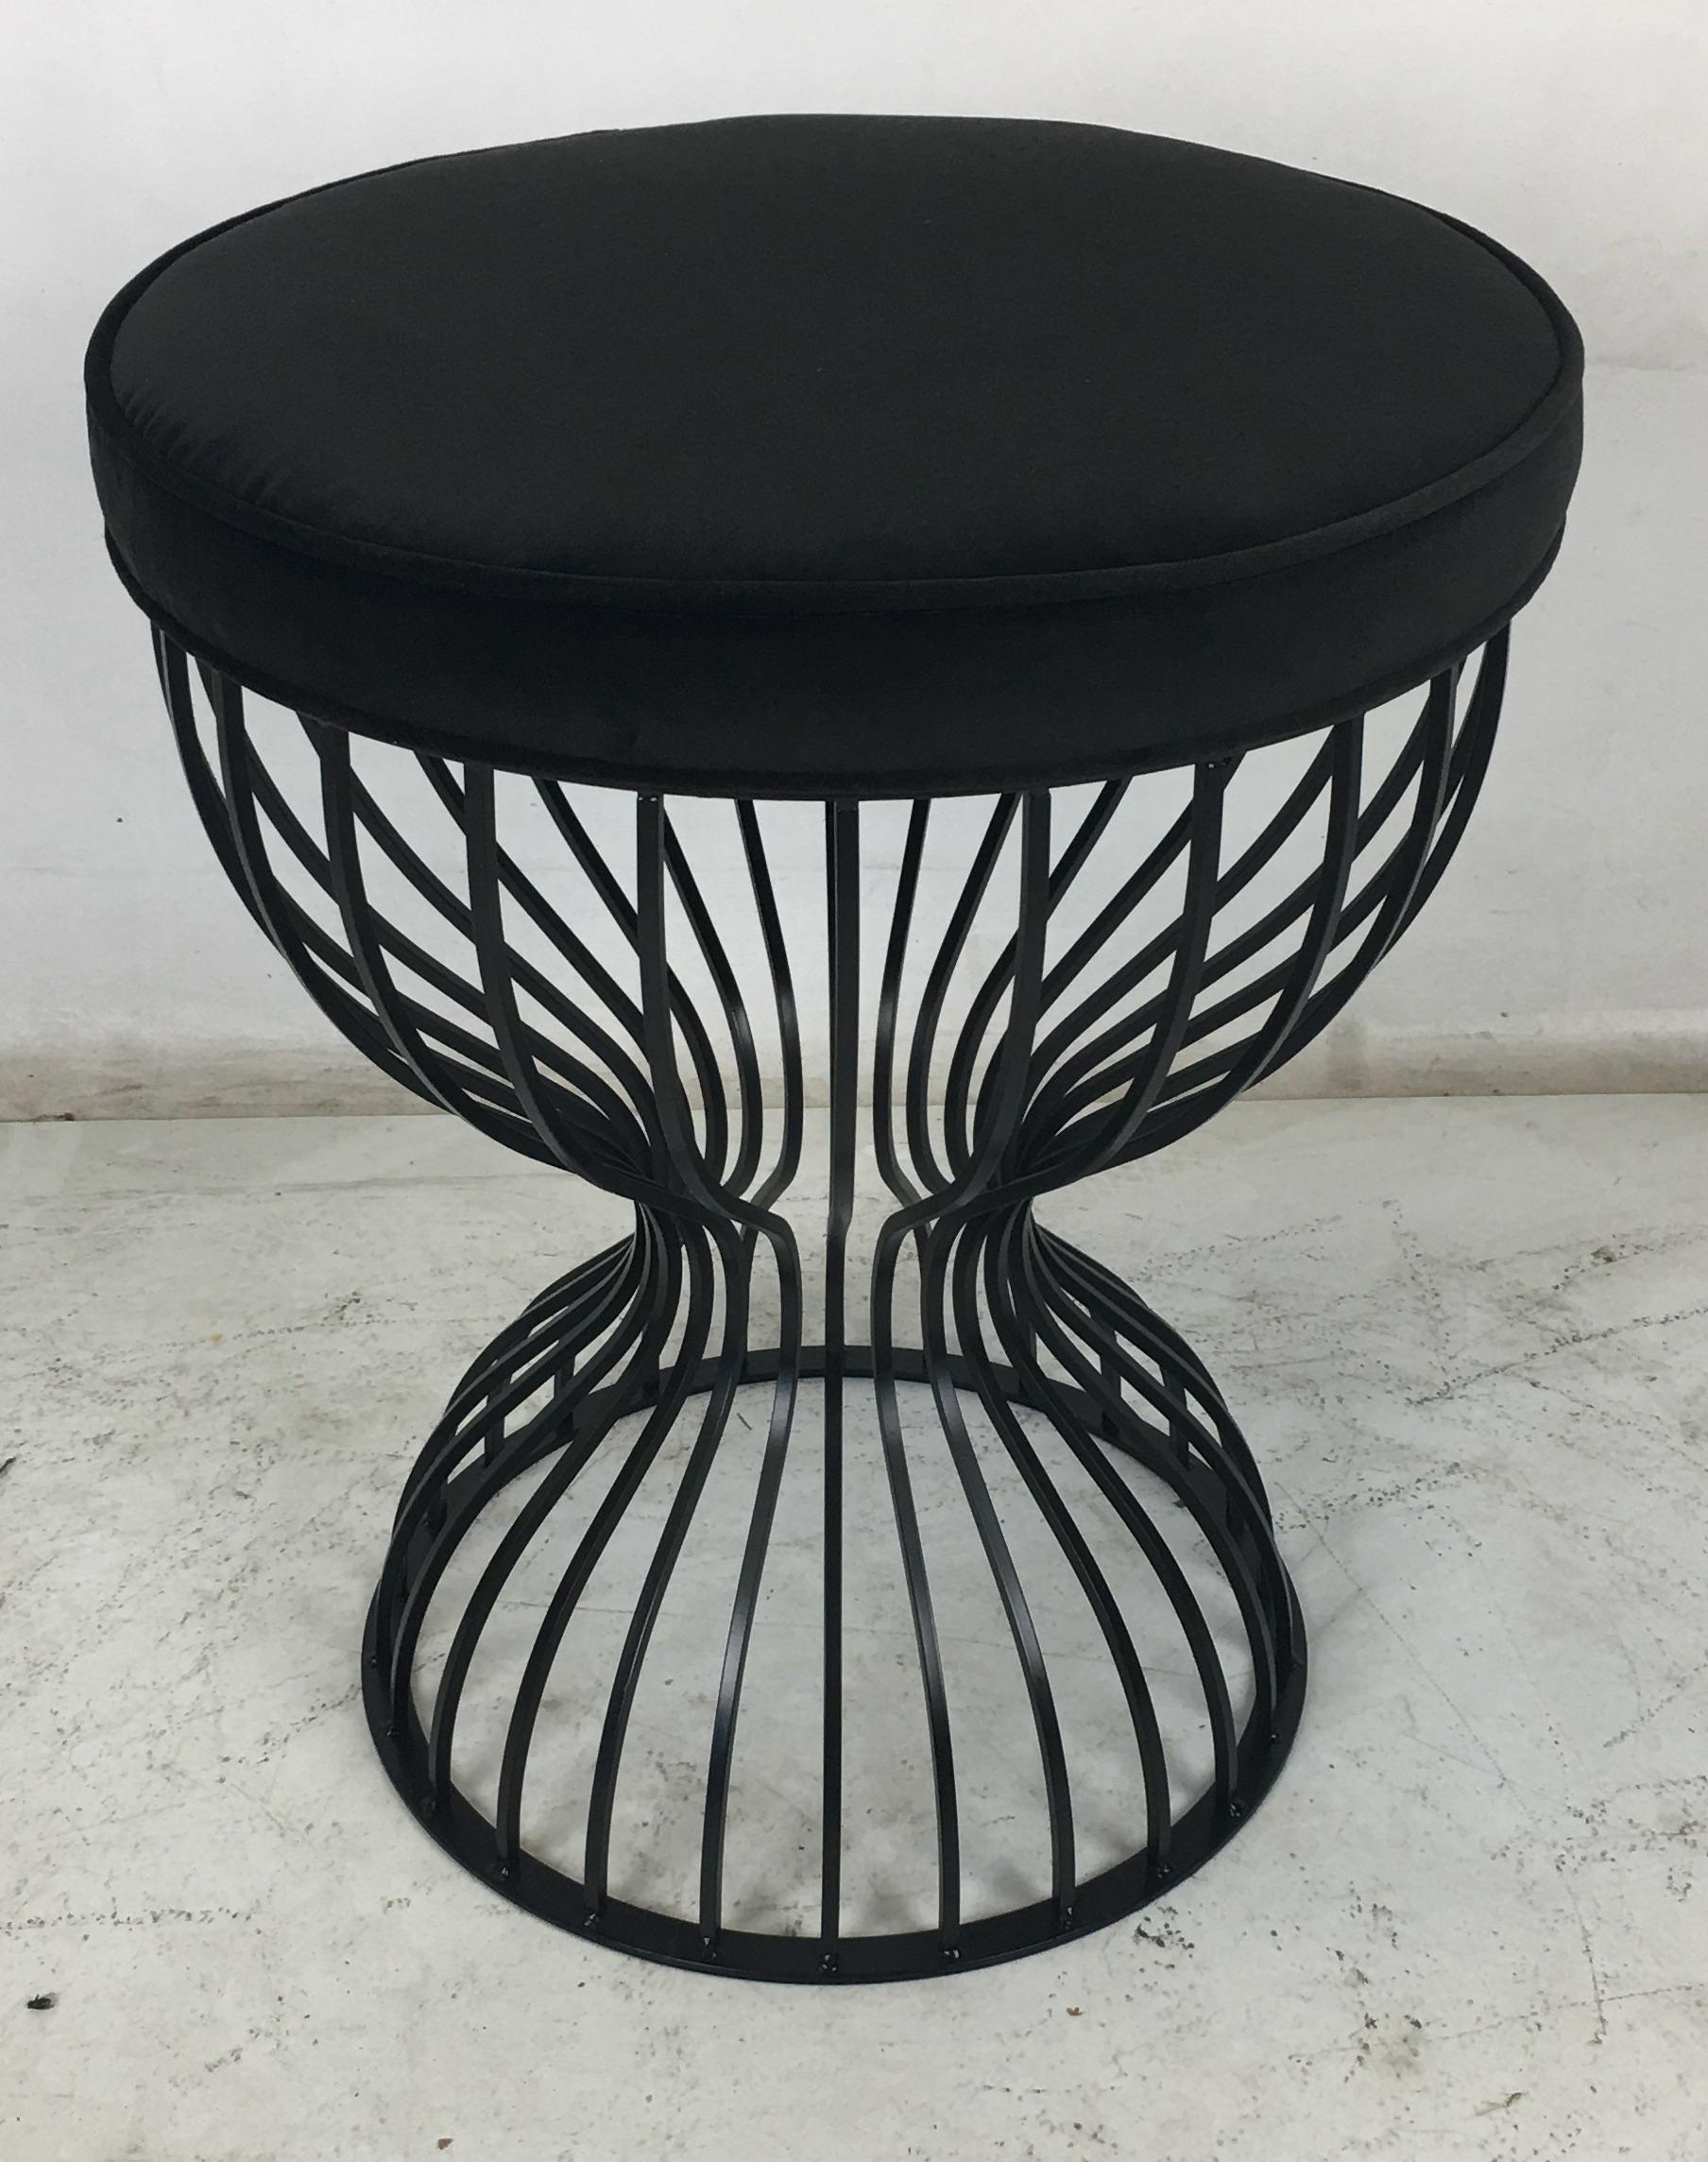 Steel hourglass cage form vanity or task stool with luxurious velvet seat.